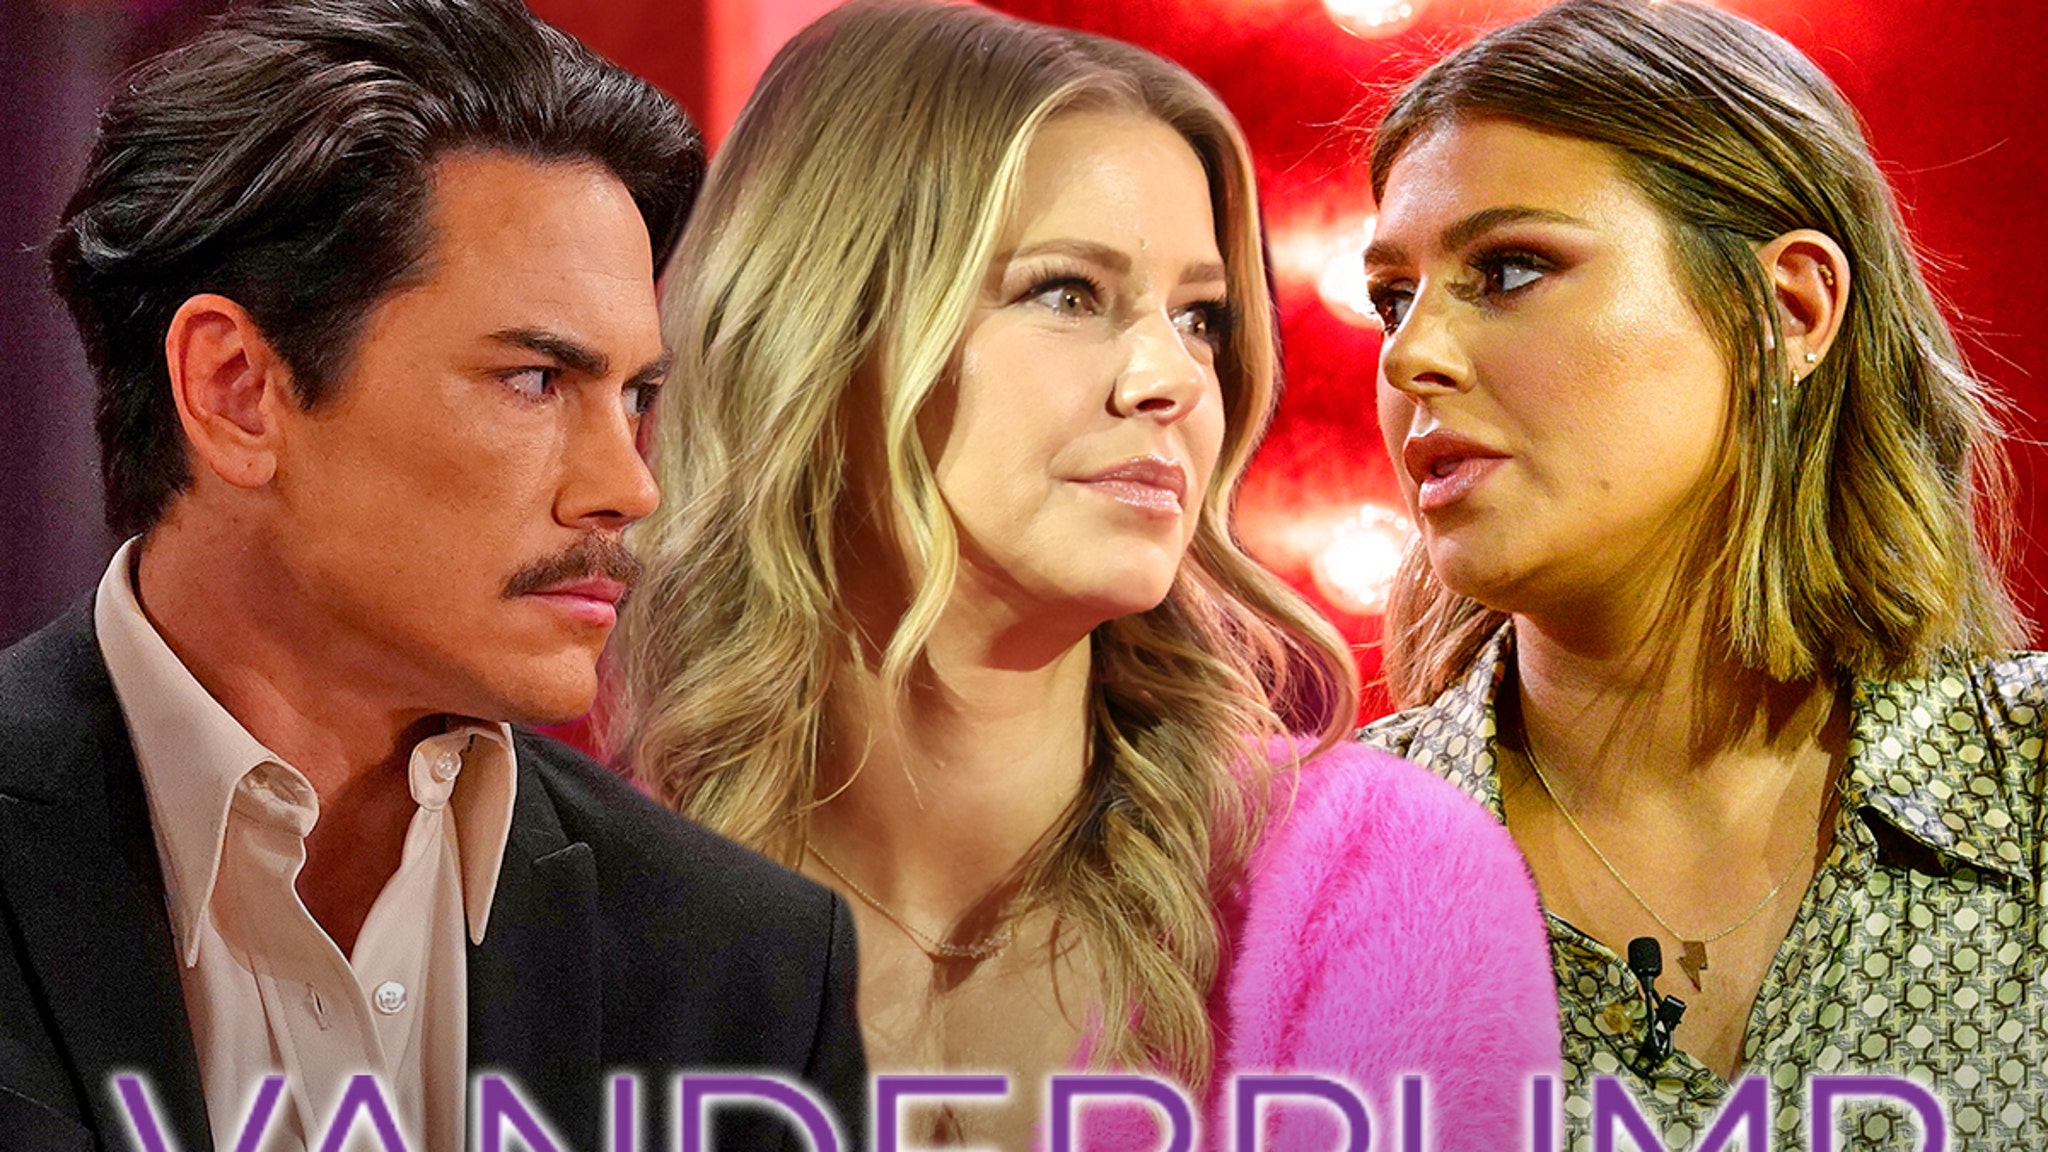 'Vanderpump Rules' Returns to Production for New Season, Raquel Not Signed Yet